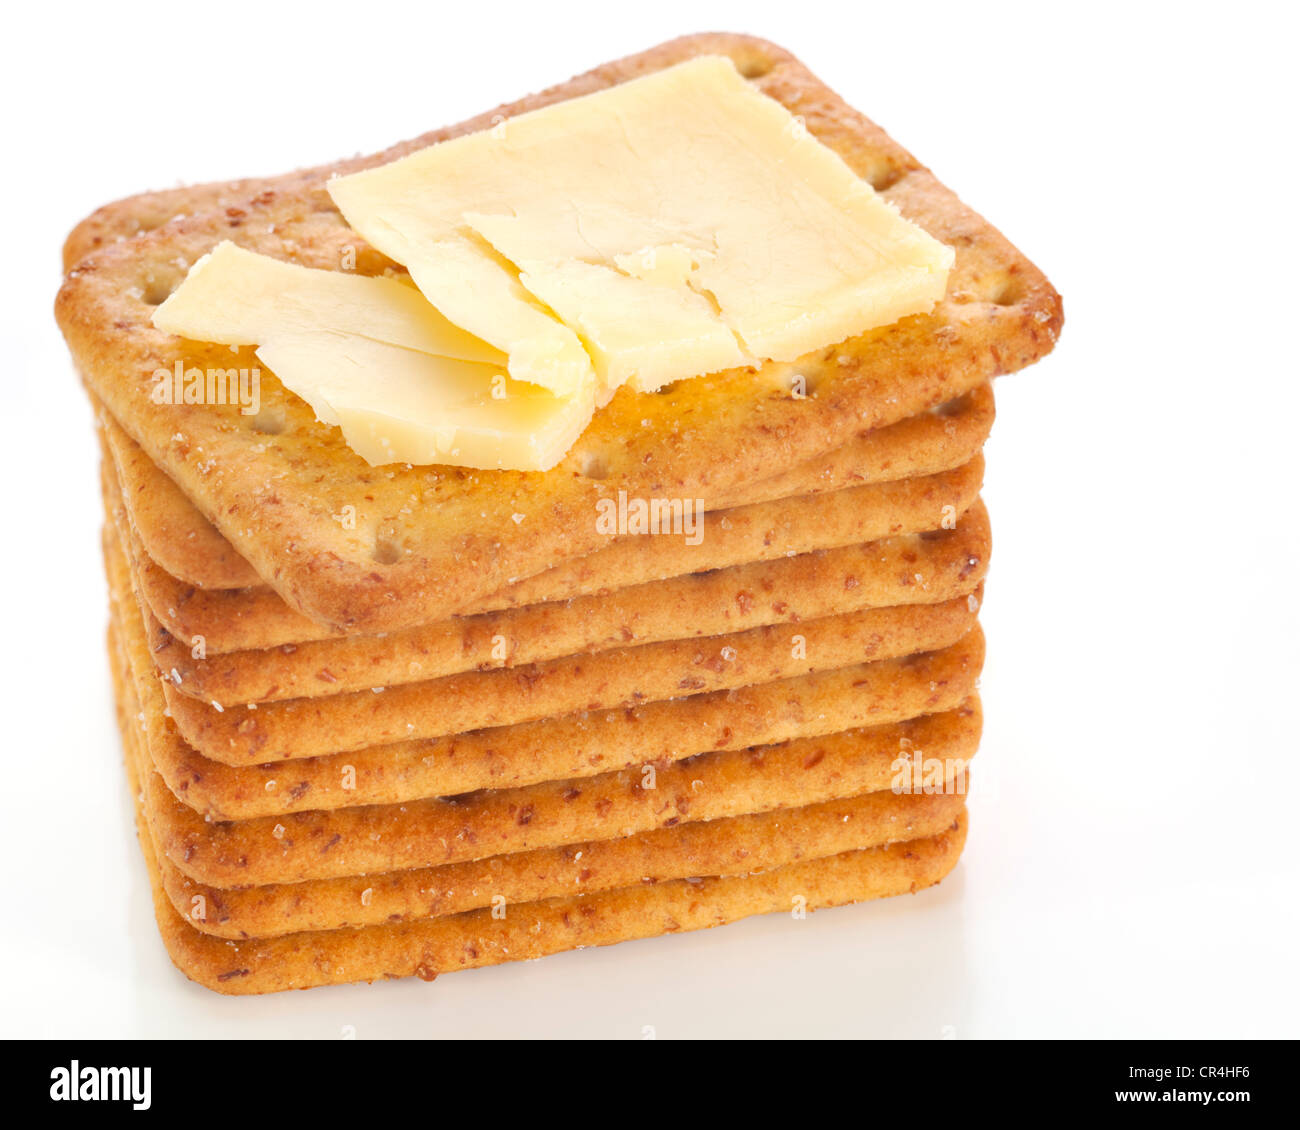 Crumbly aged cheddar on a stack of crackers, on a reflective white plate. Stock Photo